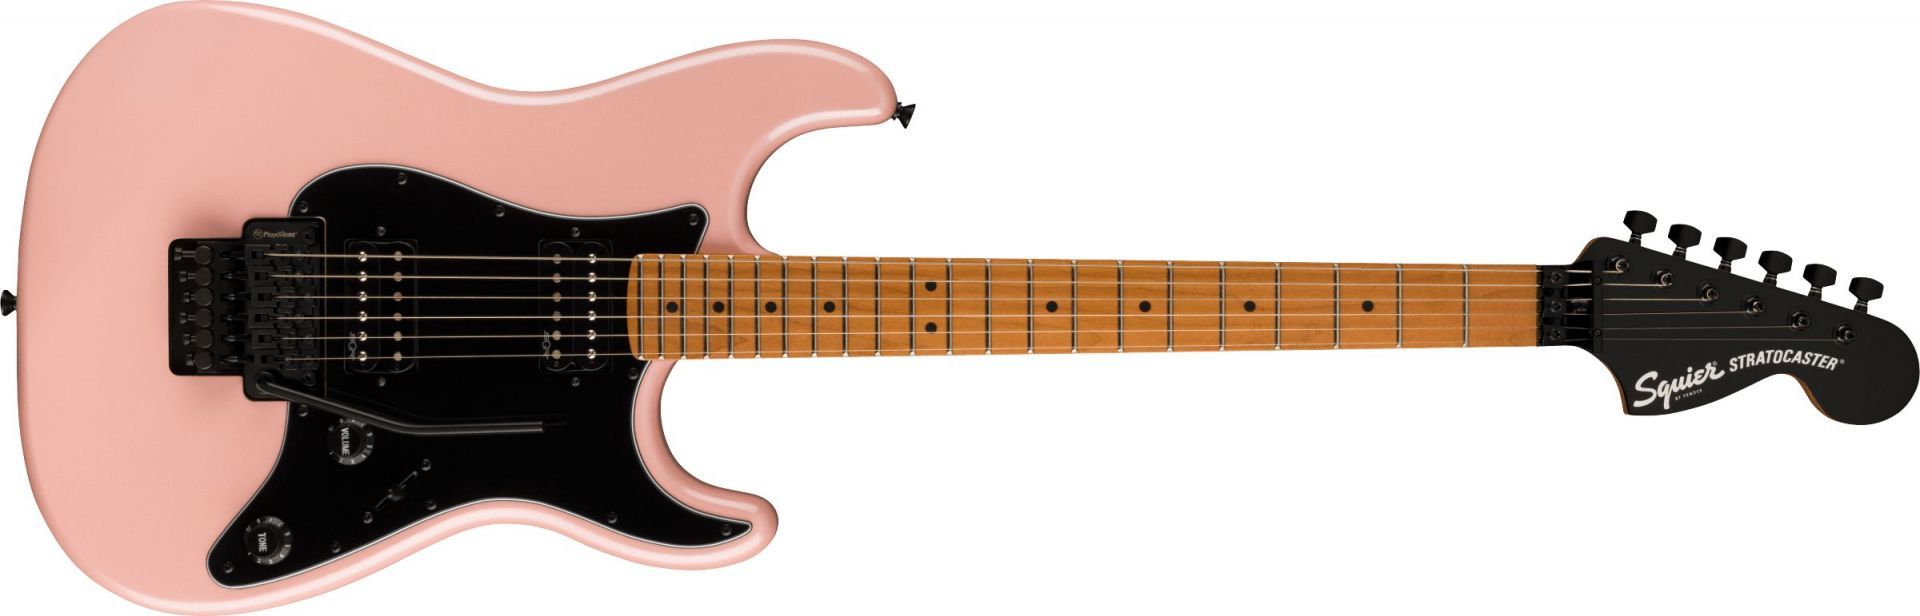 Squier Contemporary Stratocaster HH FR Roasted Maple Fingerboard Black Pickguard Shell Pink Pearl